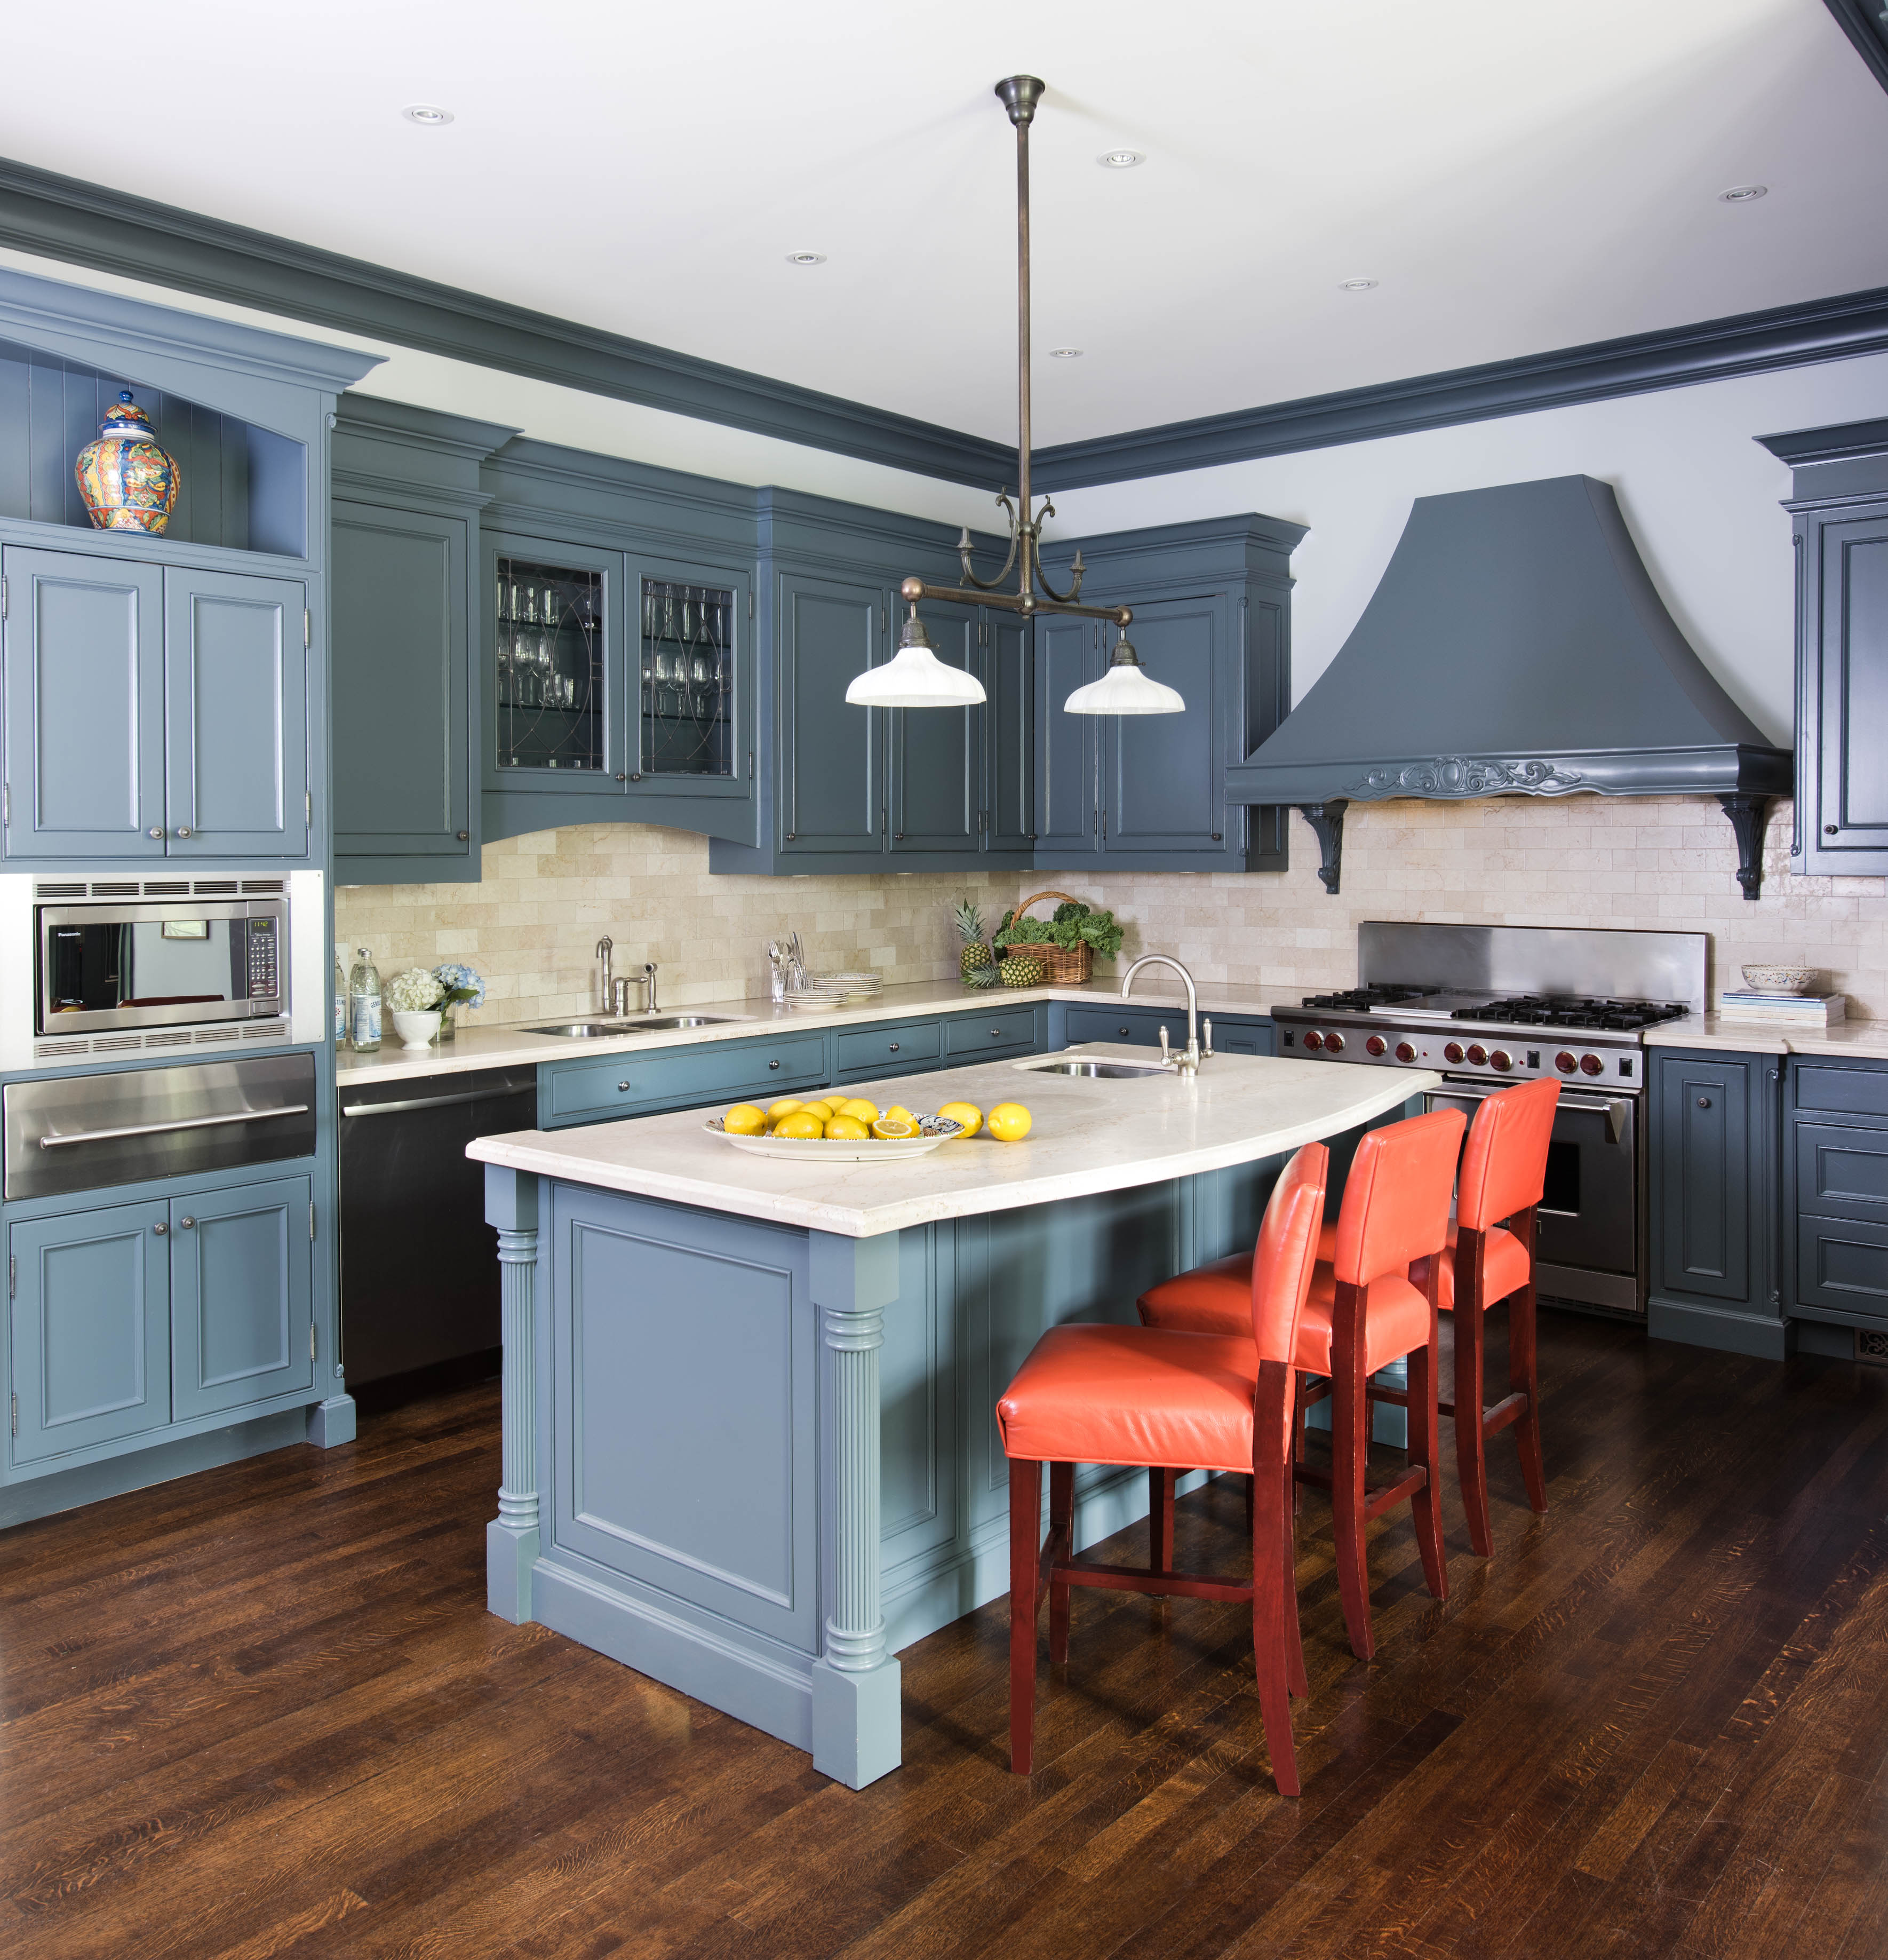 To paint or not to paint the kitchen cabinets | WillMac Design